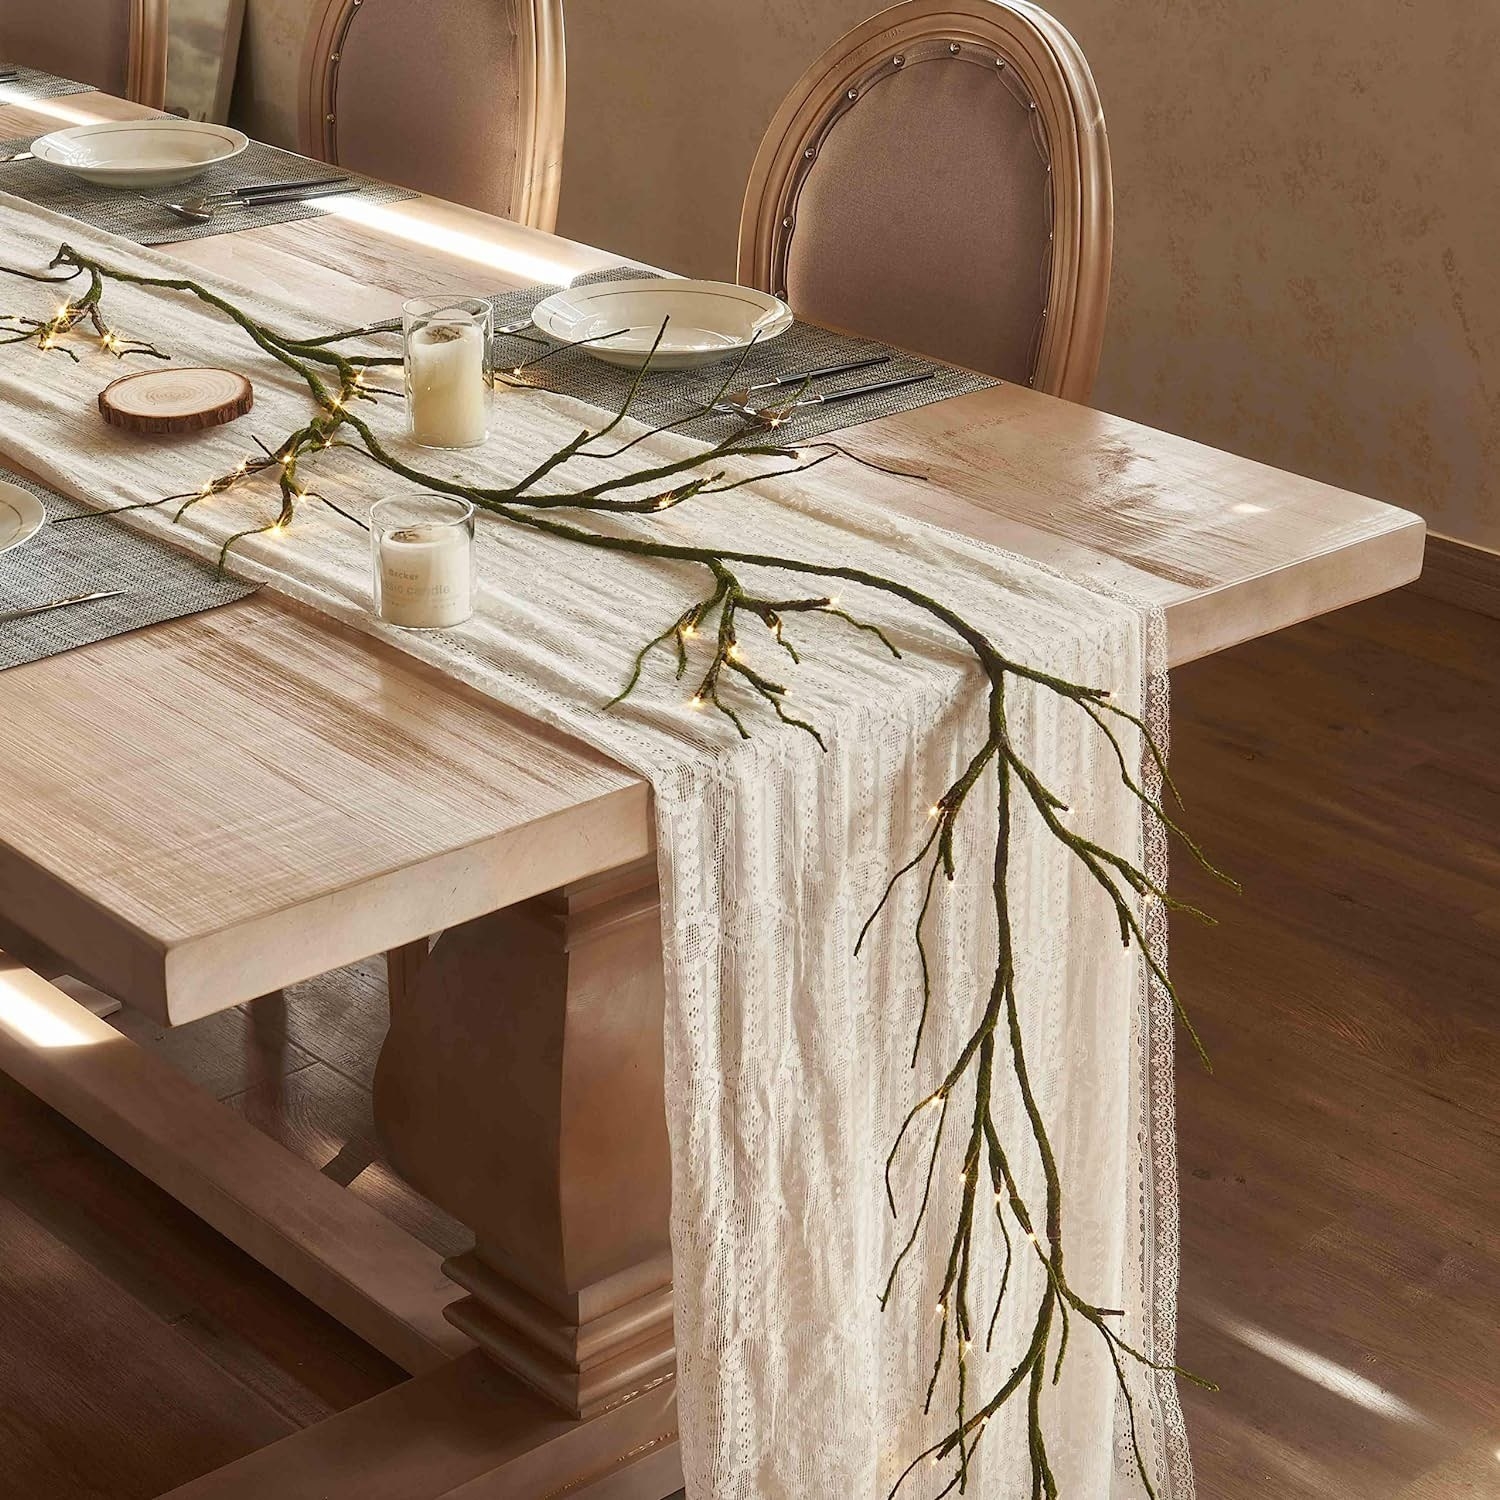 branch with led lights on the tips used as a centerpiece on table runner